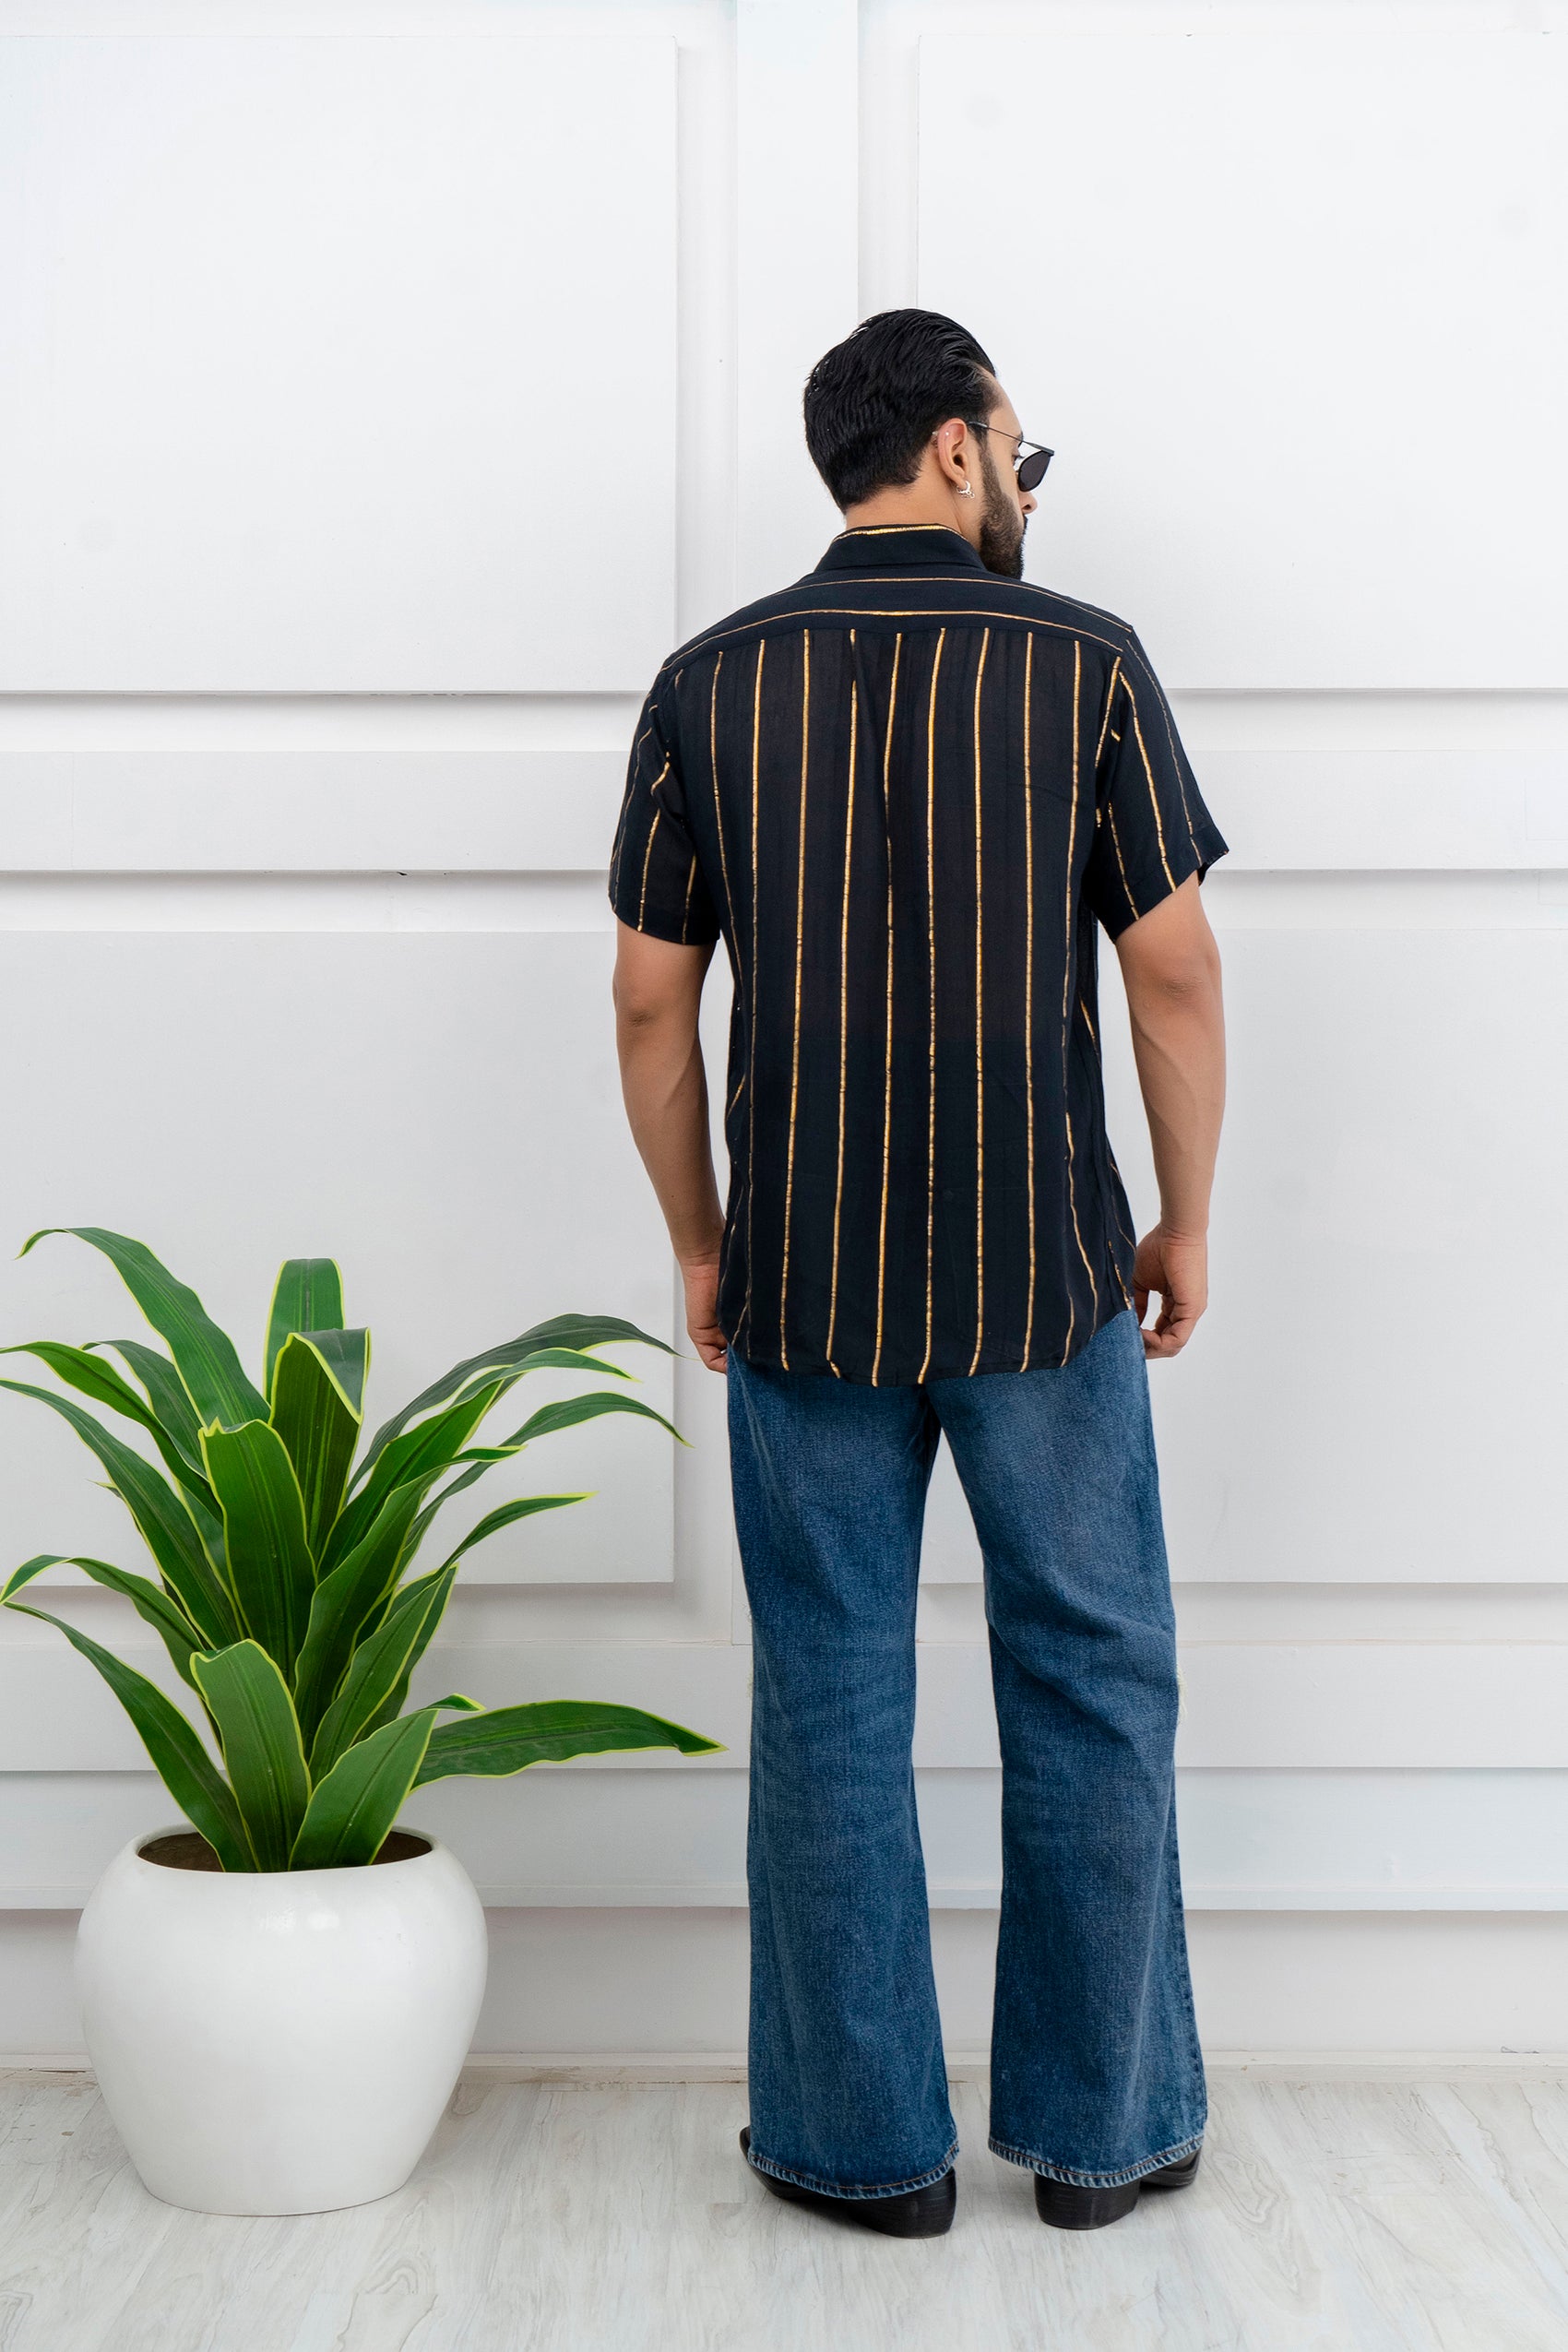 Firangi Yarn Relaxed Fit Super Flowy Re-engineered Cotton Lurex- Half Sleeves Party Shirt Black Gold